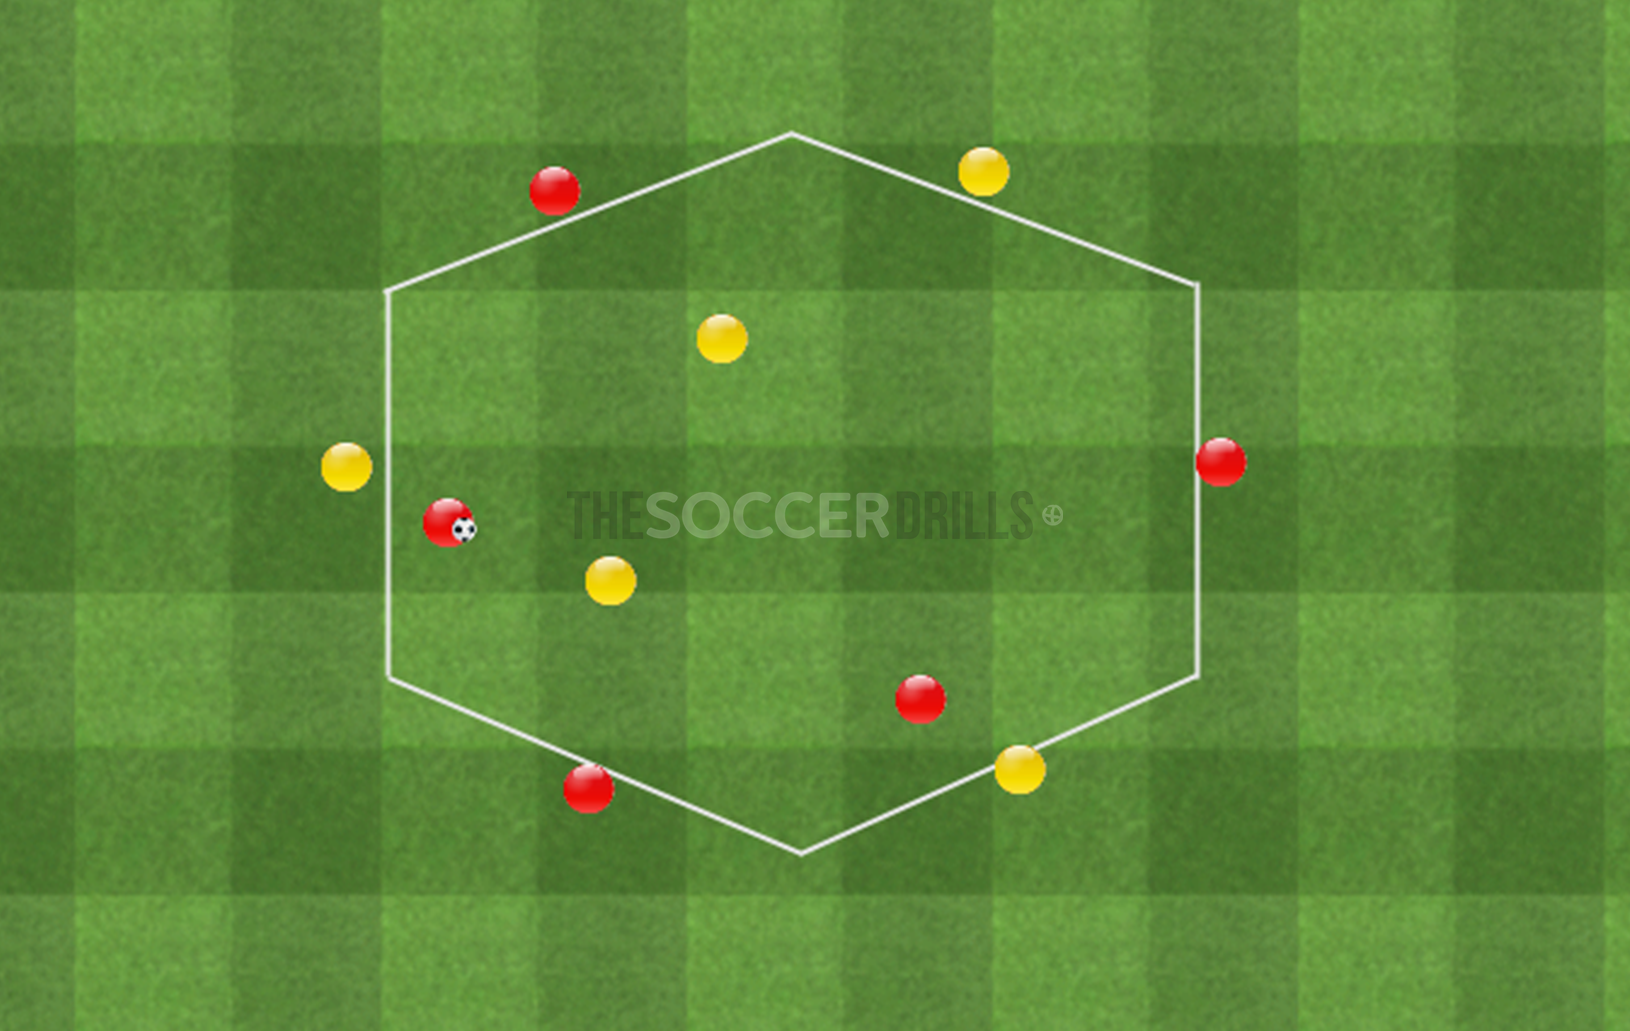 Soccer Drills for coaches, Soccer Drills for kds, Tactical Football Exercises, Tacical Soccer Drills, Drills for counterattack, Possesion  possesion drills soccer, Small-Sided Soccer Games,